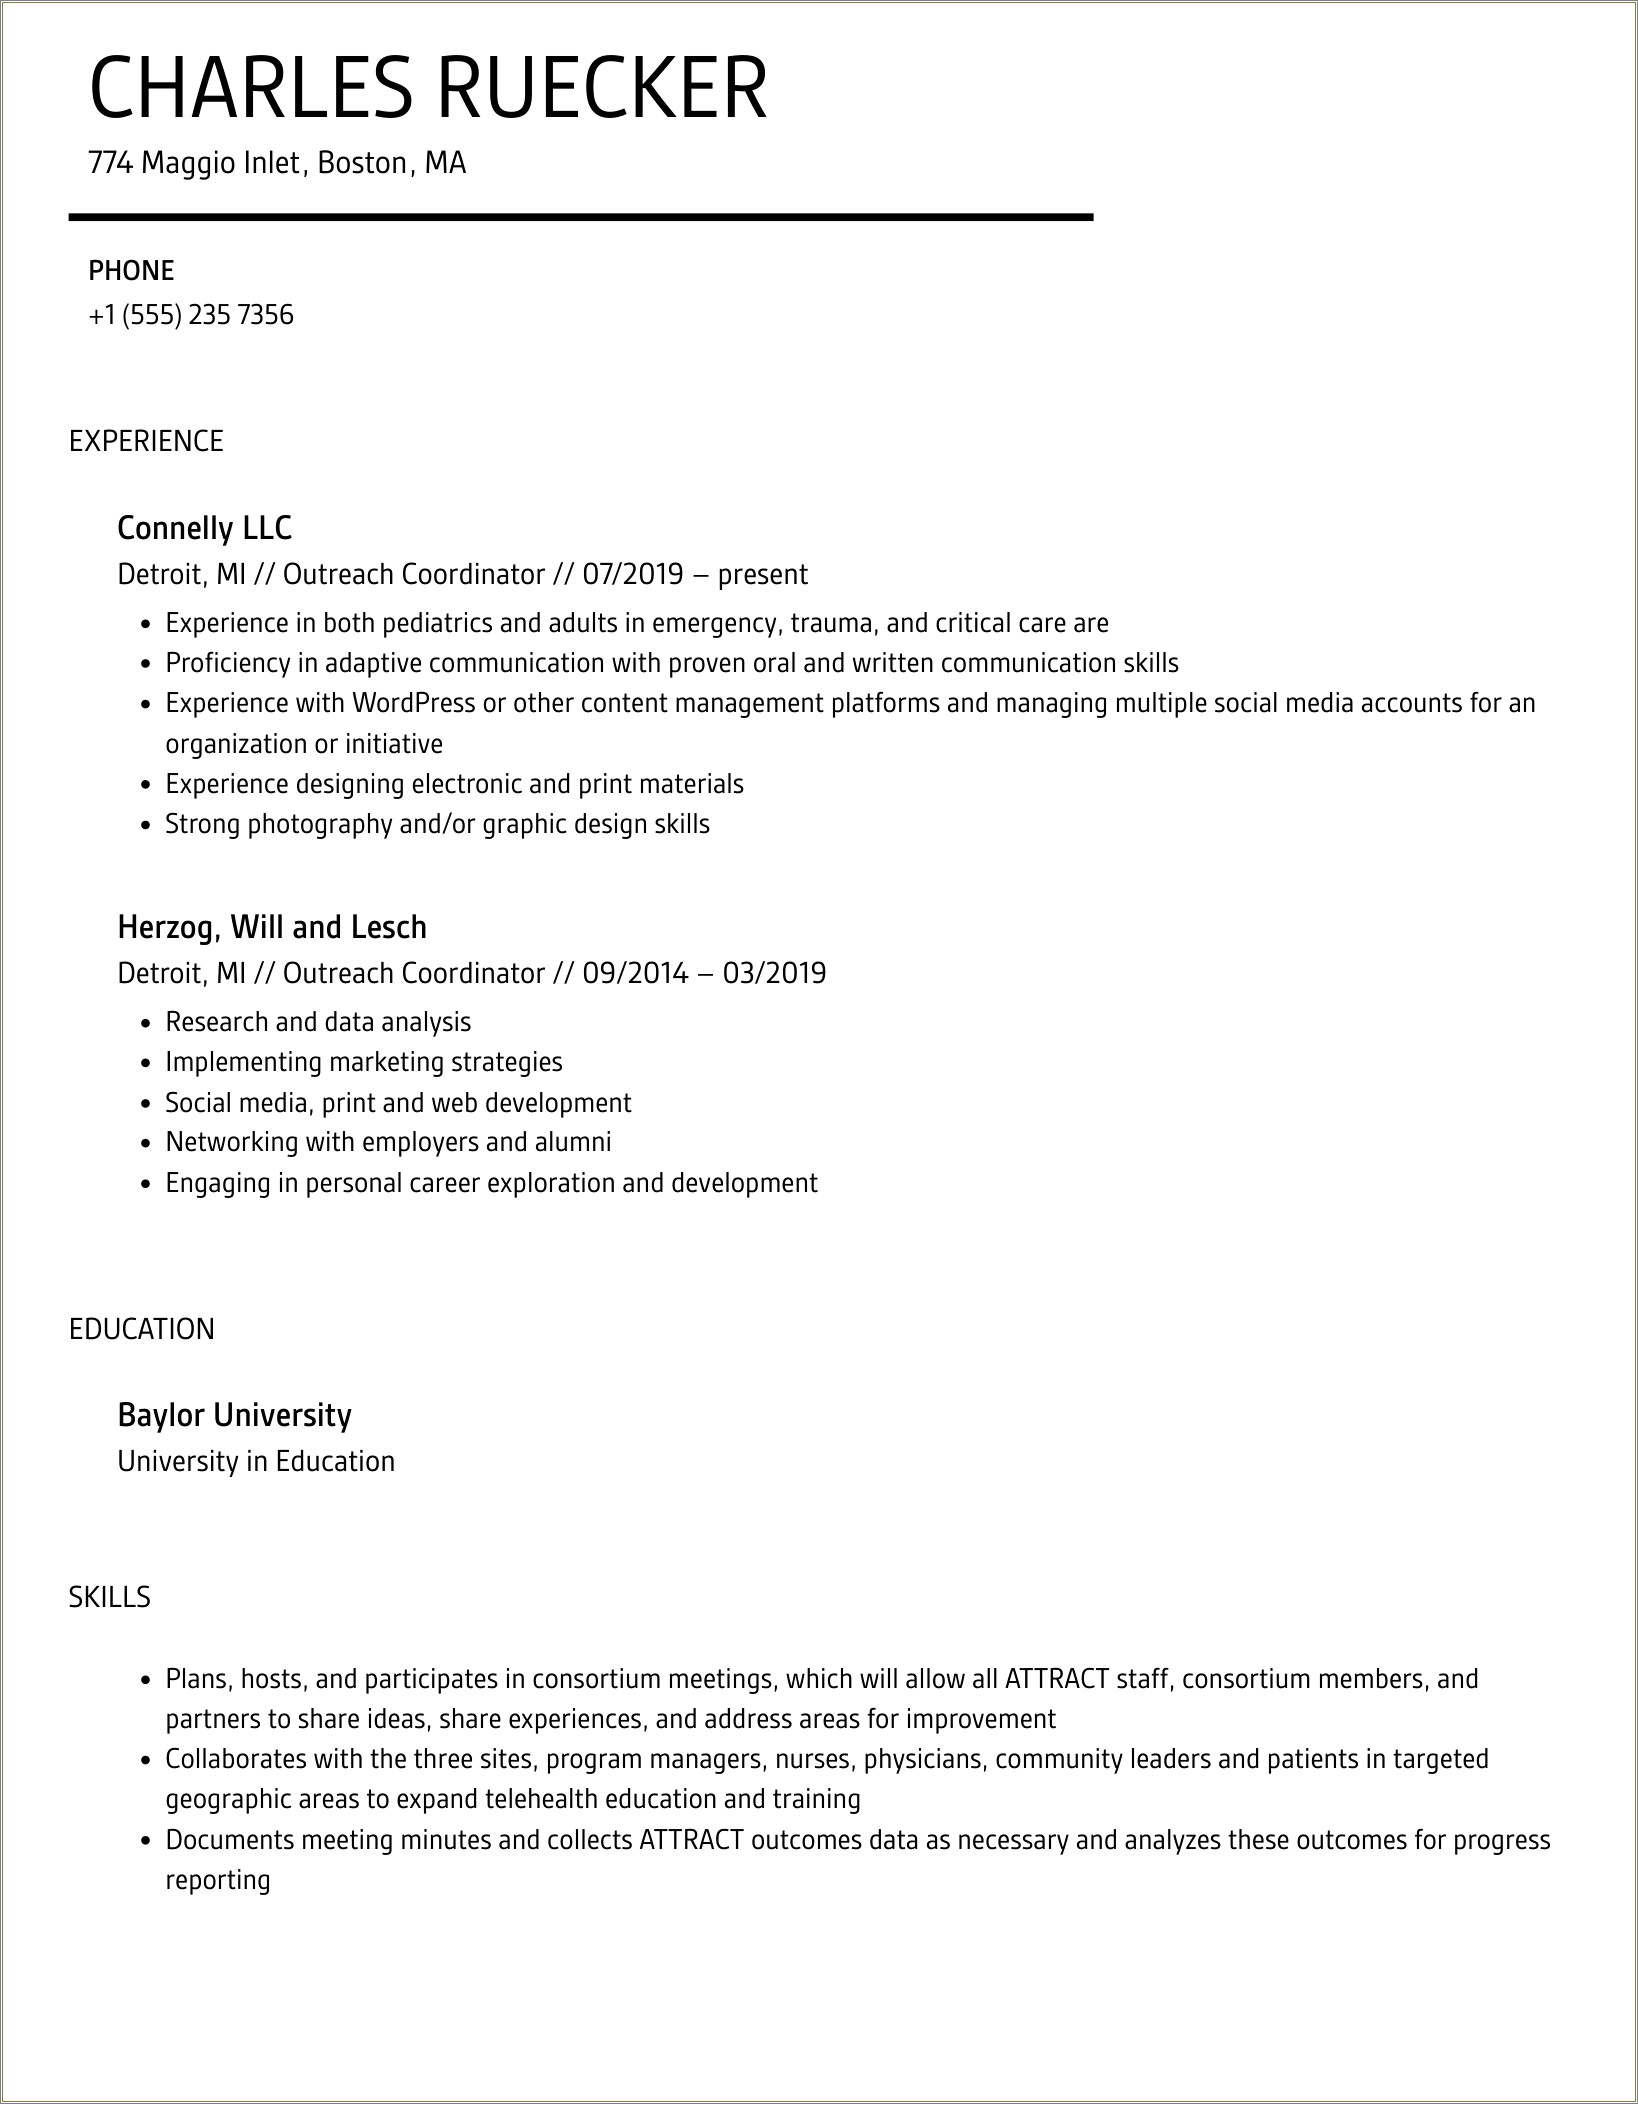 Resume Summary Examples For Outreach Director